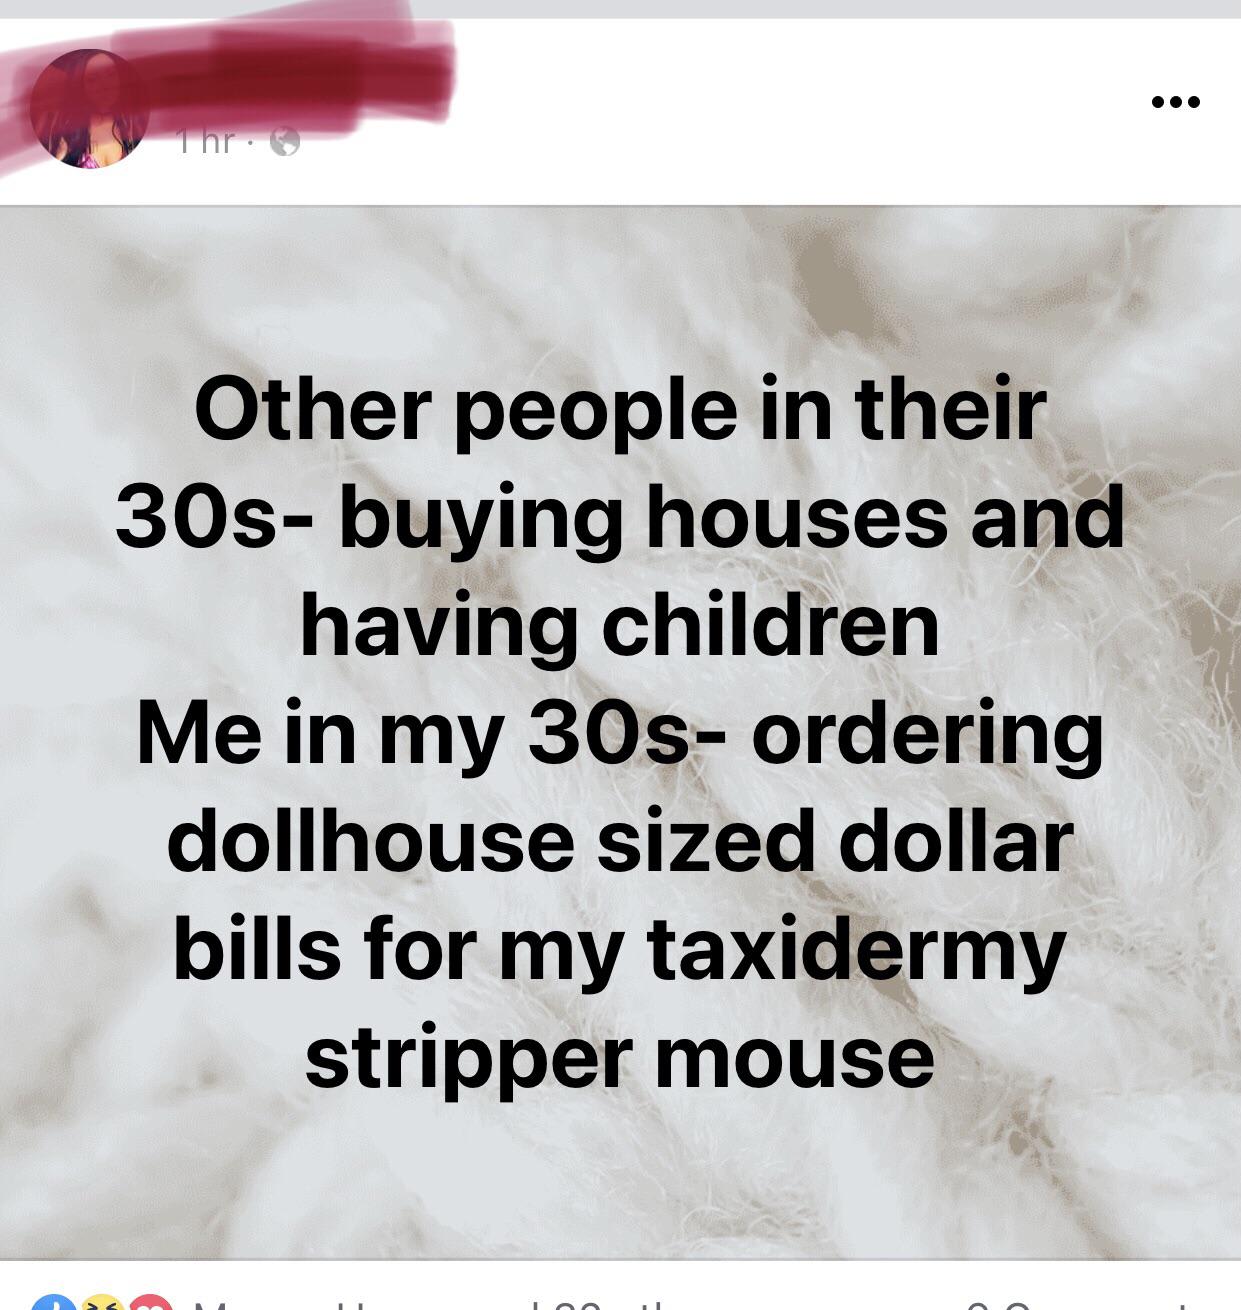 Ordering dollhouse size dollar bills for my taxidermy stripper mouse.